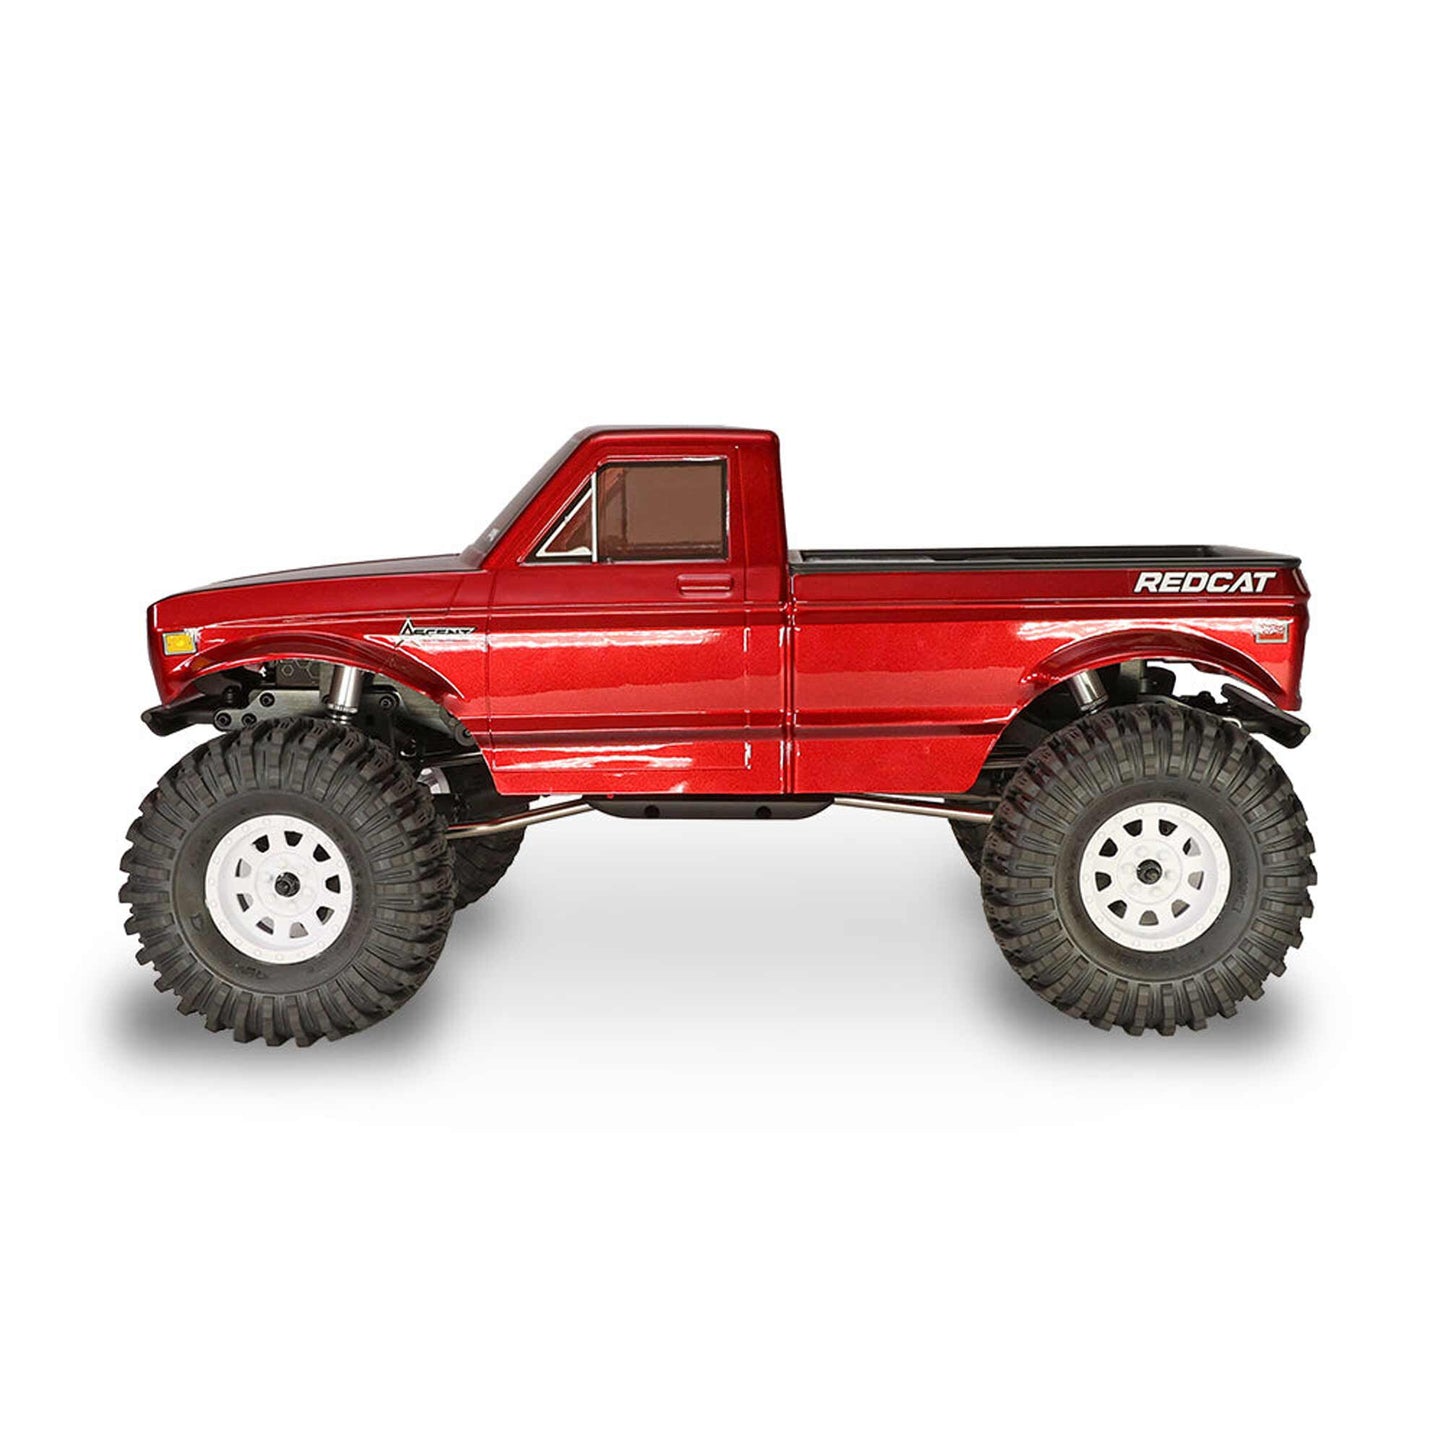 1/10 Redcat Ascent - LCG Rock Crawler - RED 1 Piece Body